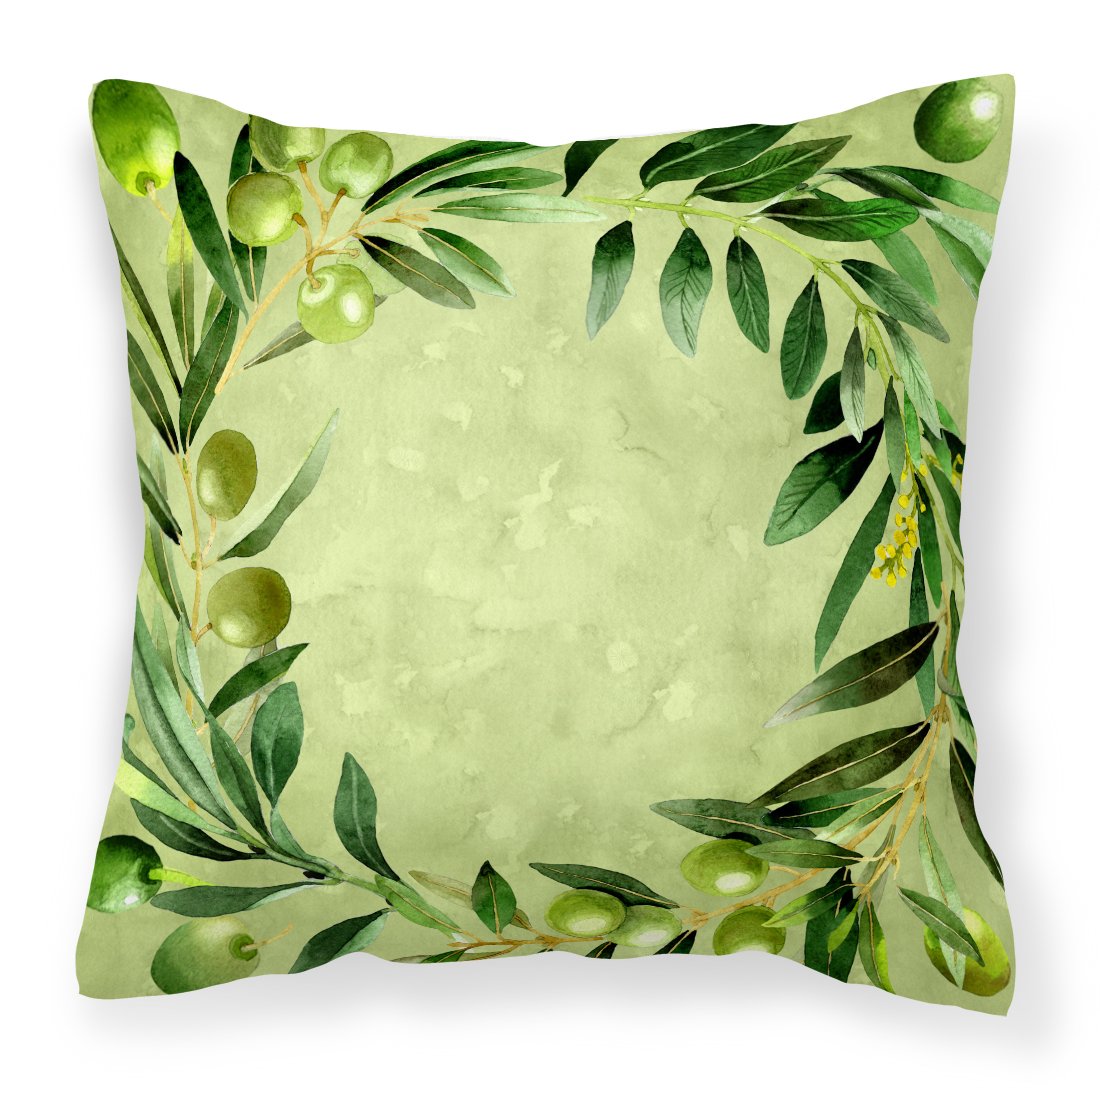 Olives Fabric Decorative Pillow CK1702PW1818 by Caroline's Treasures